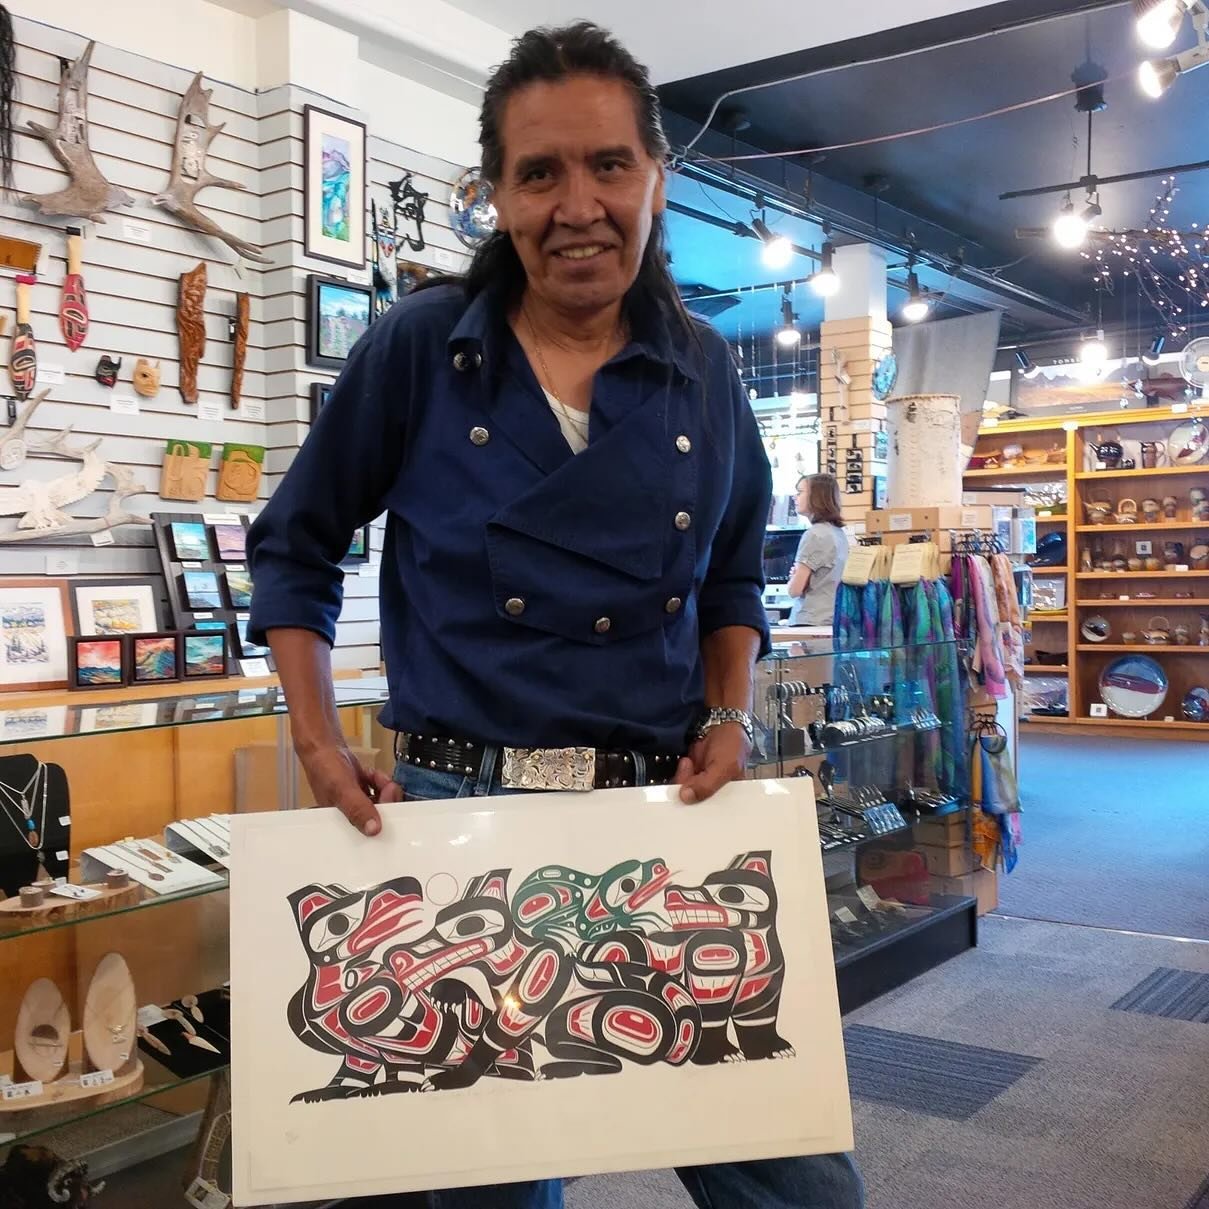 Featuring one of our favorite artist this week Richard Shorty
He had been a popular artist with us for a while. He will be missed, but his art lives on to tell his stories.

Richard Shorty

CULTURAL GROUP: Northern Tutchone  BIRTH DATE:  September 25